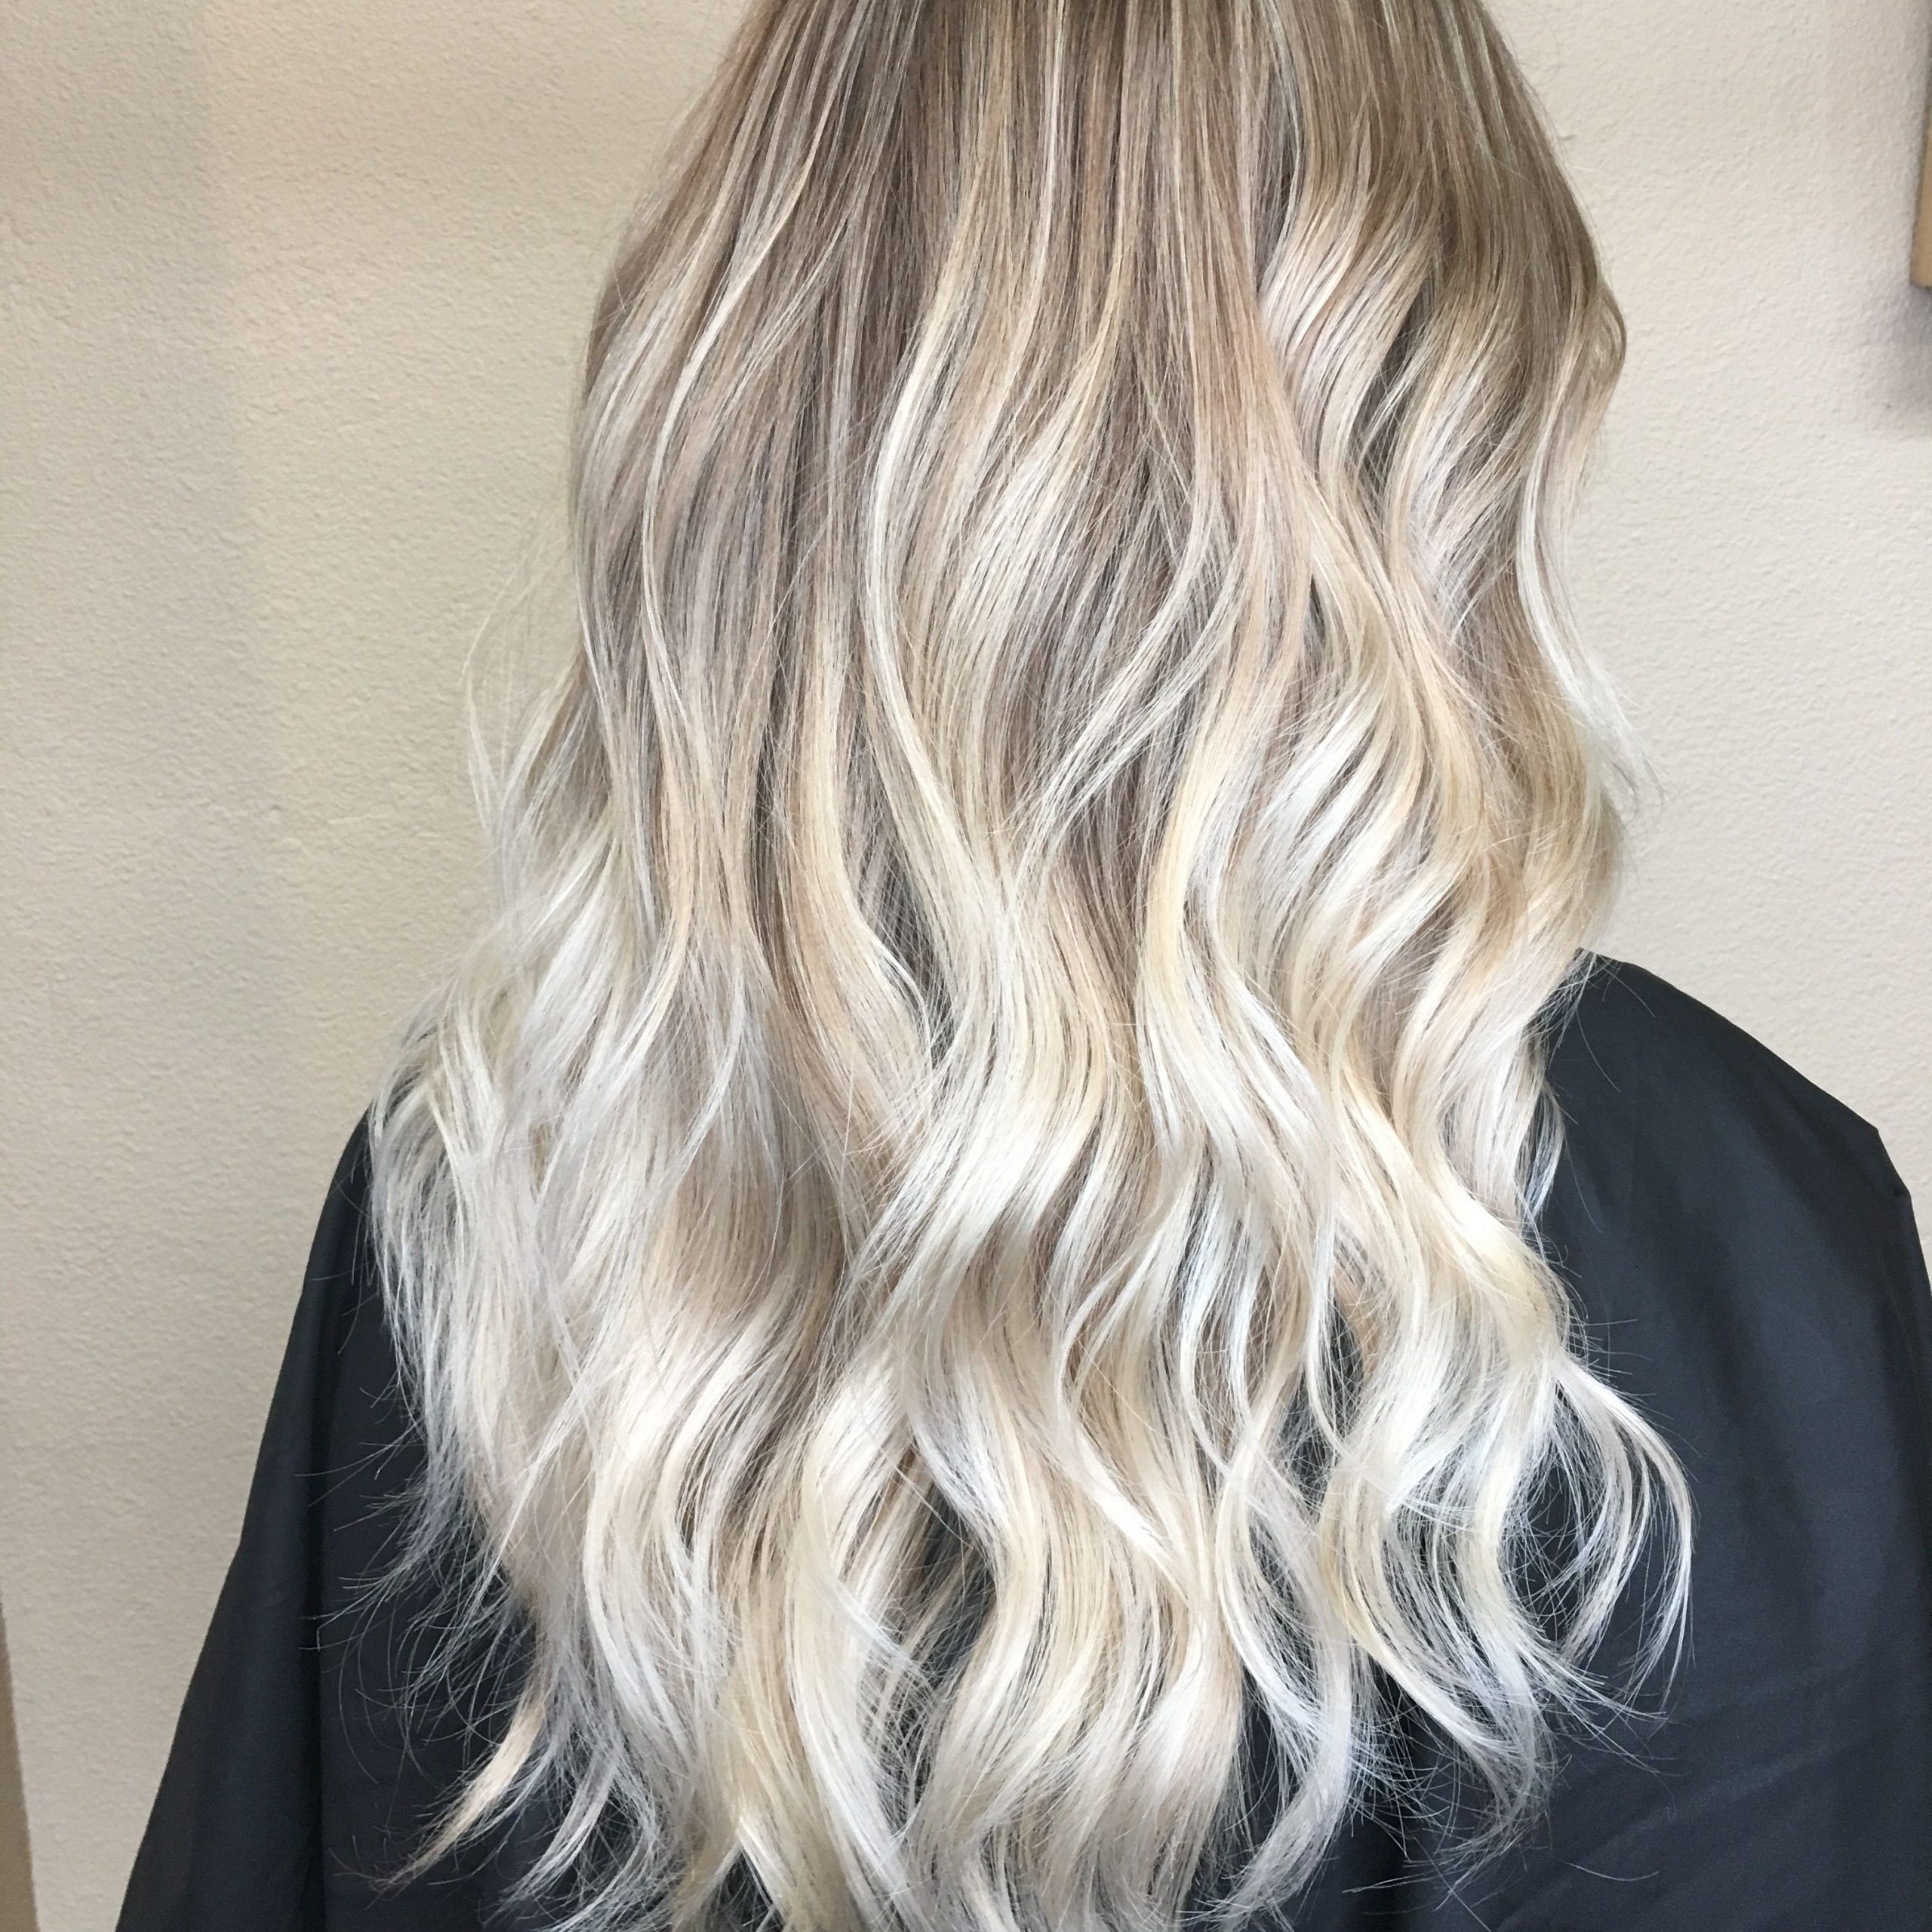 Icy Blonde, Creamy Tone, Soft Waves, Medium Length Hair | Medium Length Hair  Styles, Icy Blonde, Hair For Newest Icy Blonde Beach Waves Haircuts (View 4 of 25)